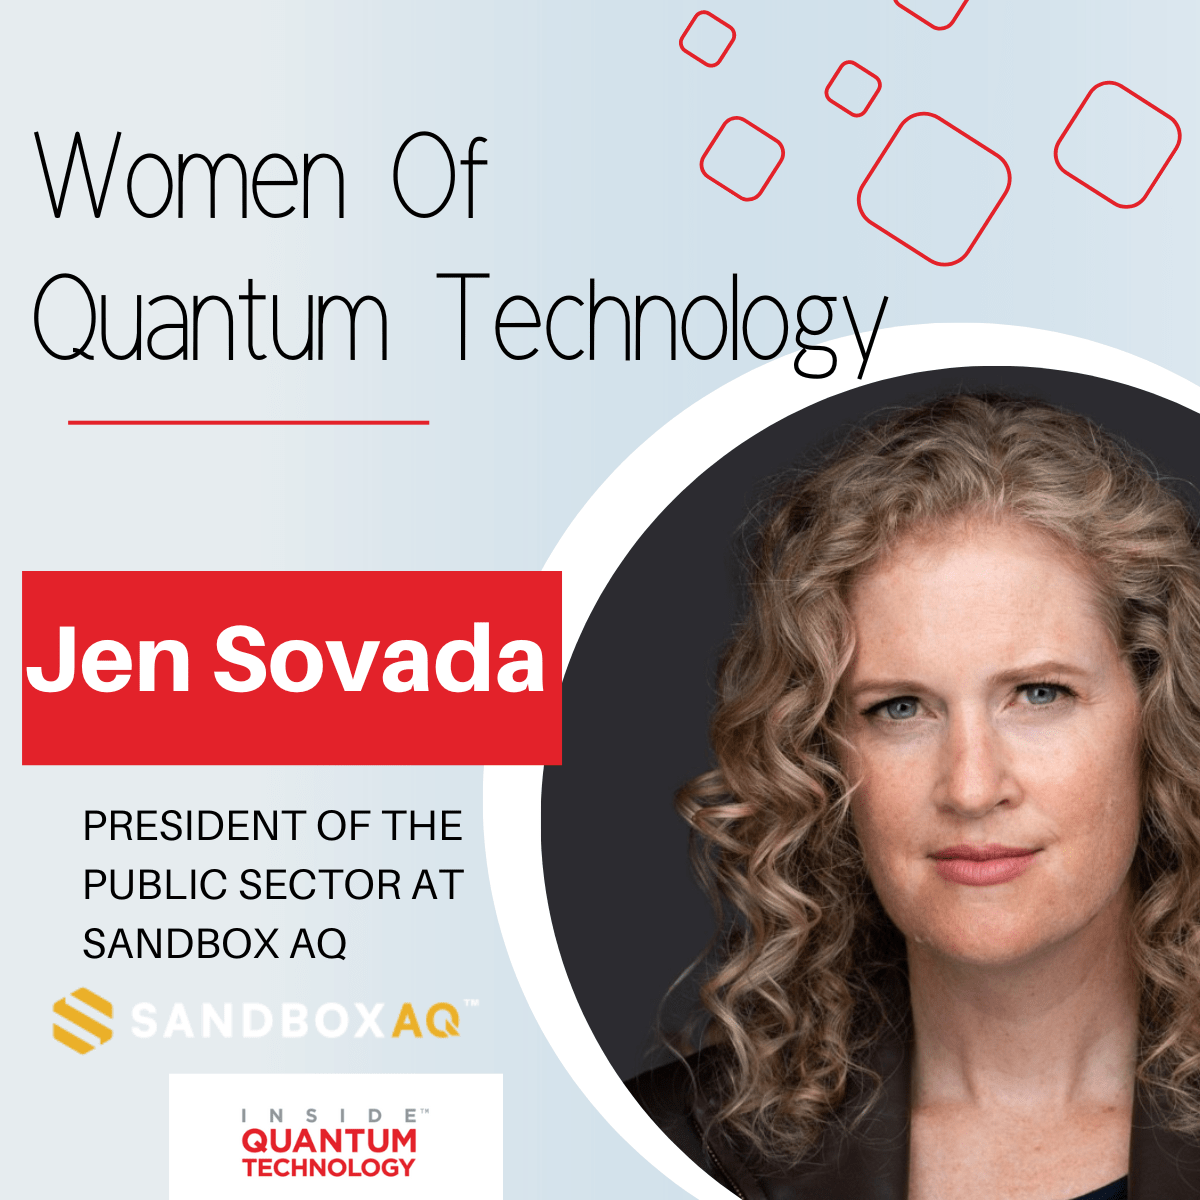 Jen Sovada, President of the Public Sector at Sandbox AQ, discusses her role in the company and the importance of inclusivity.